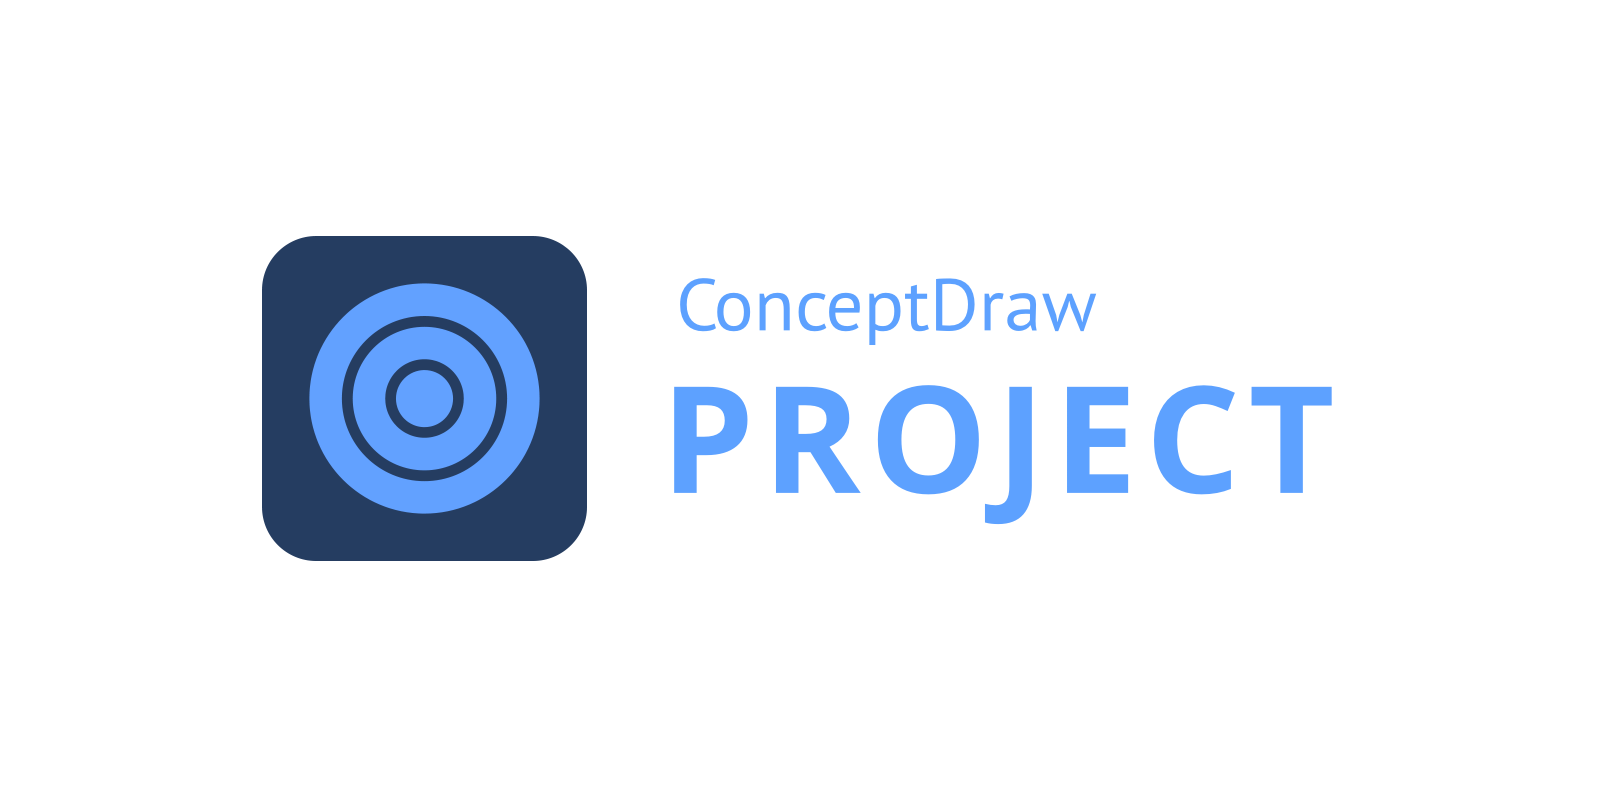 ConceptDraw PROJECT logo